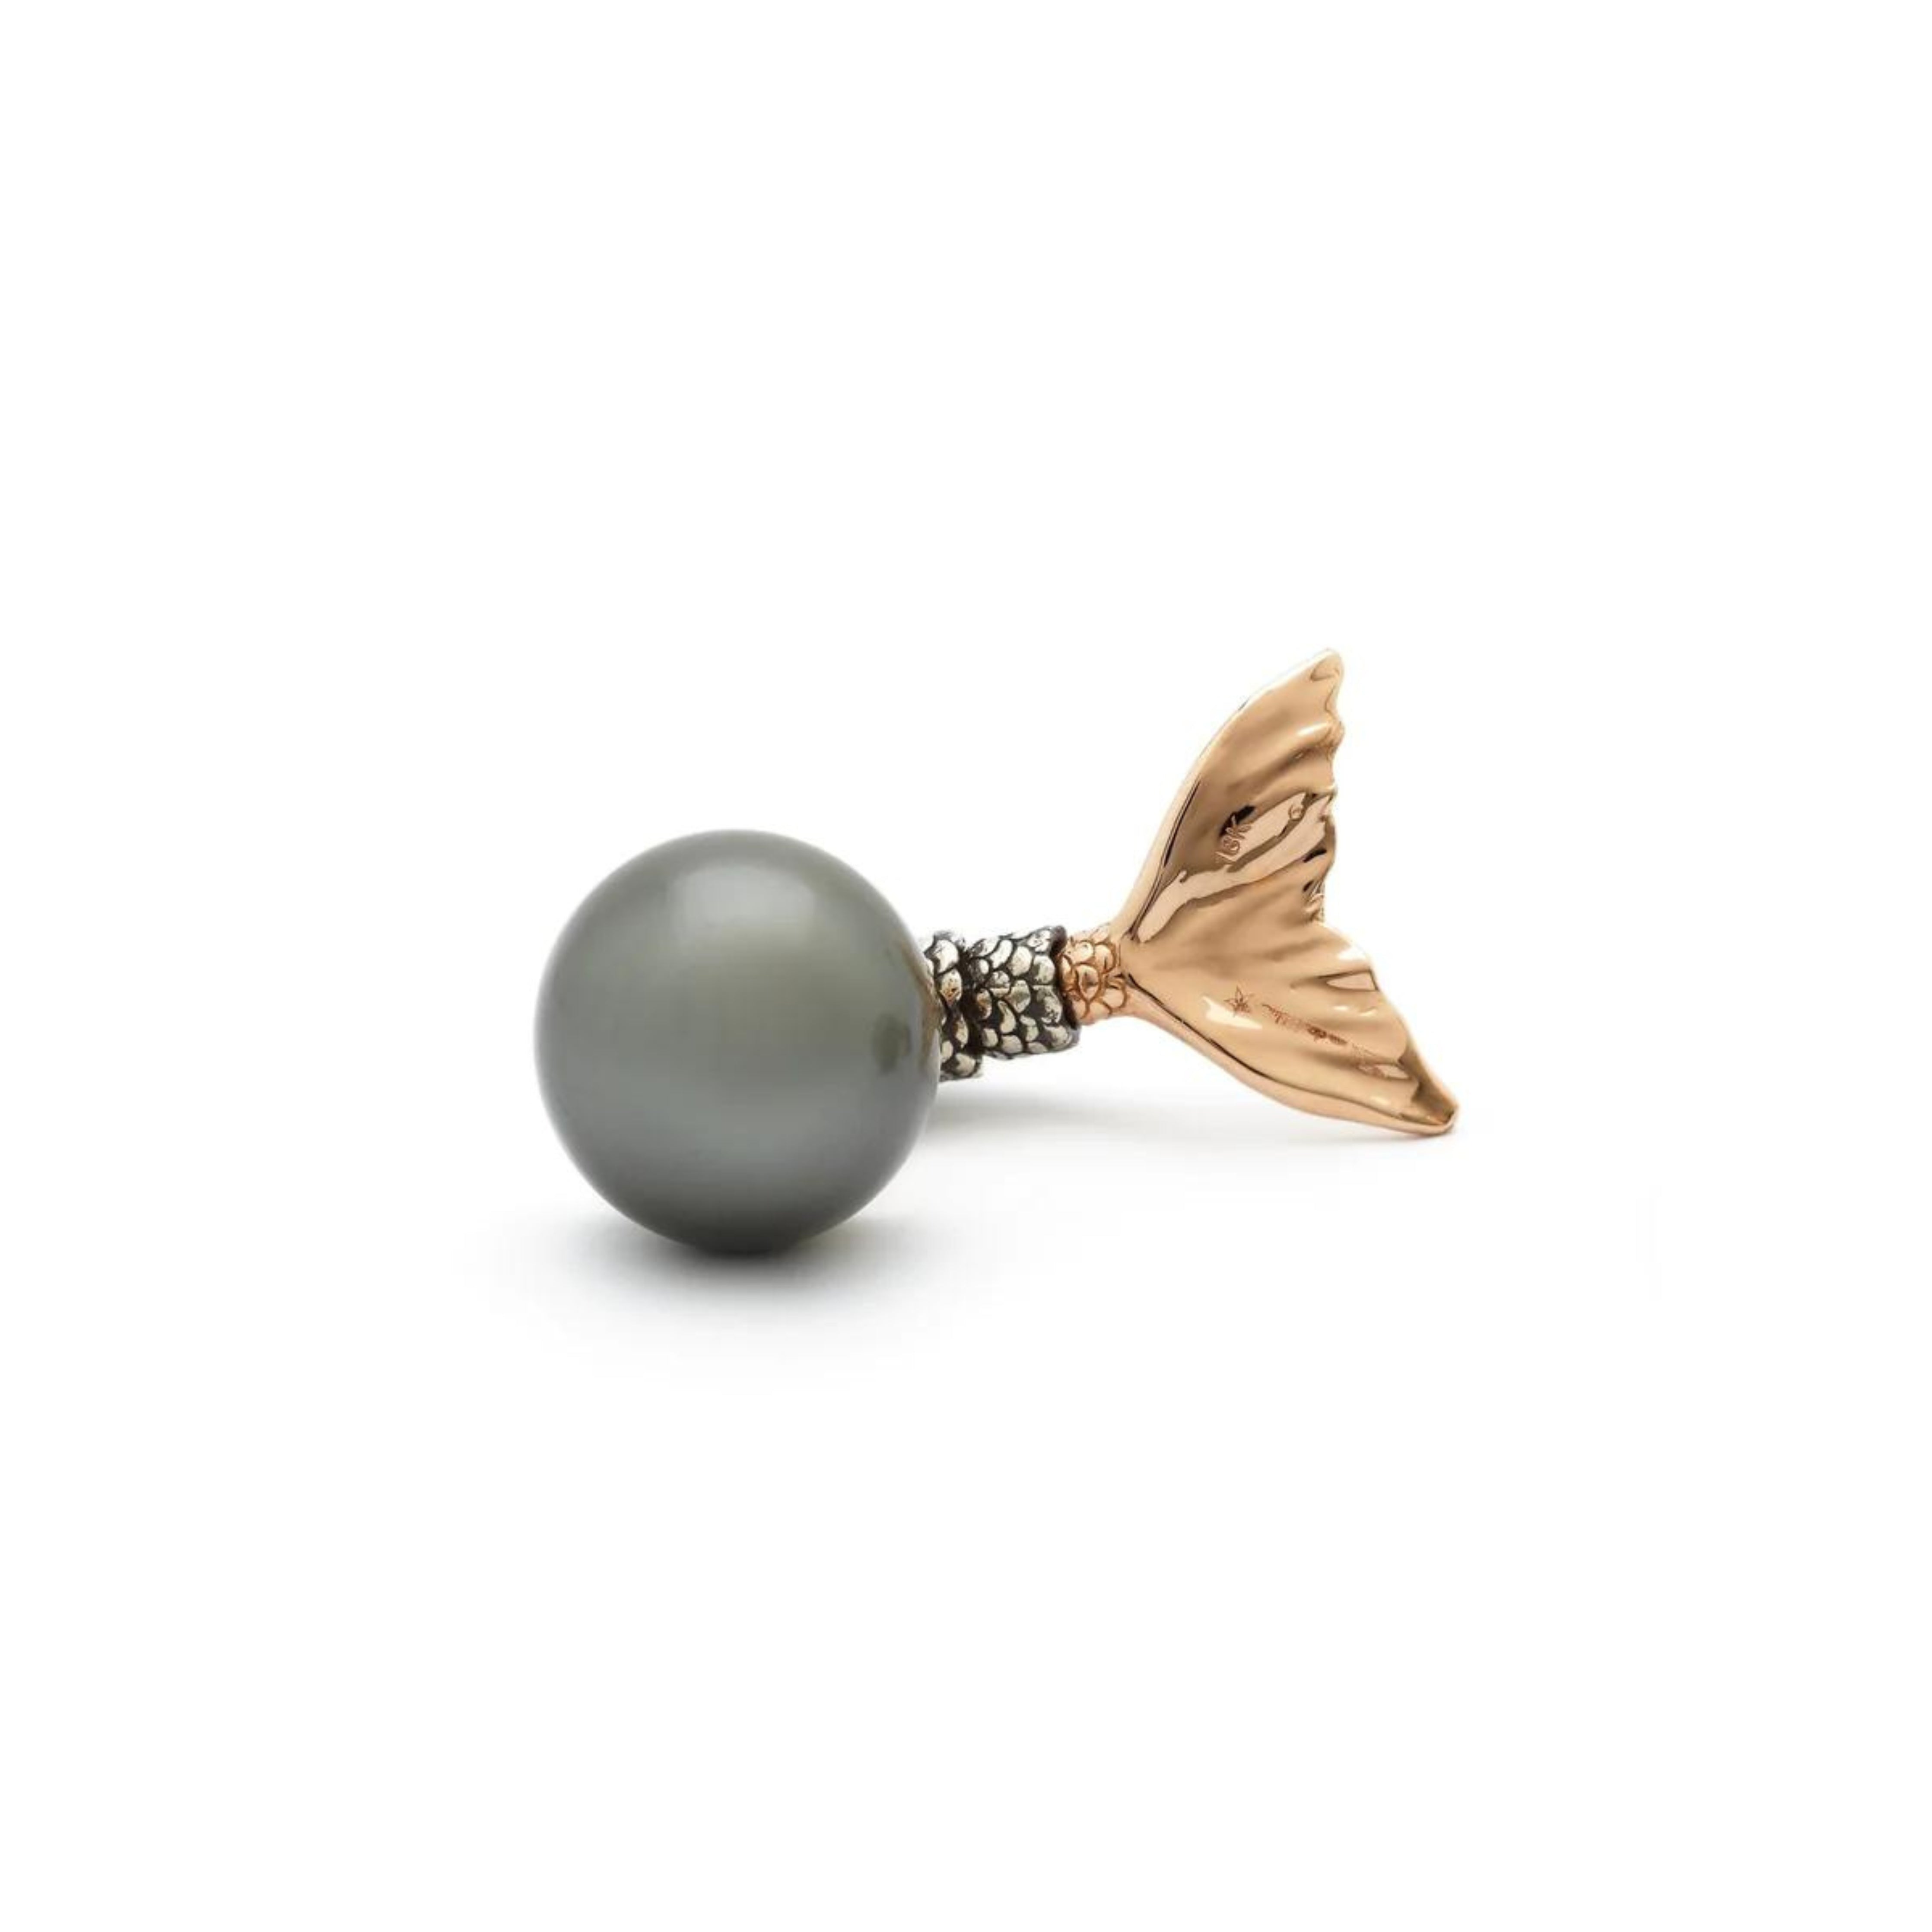 Bibi van der Velden Mermaid Pearl Earring. Made in 18K rose gold and sterling silver with a deep blue pearl and brown diamonds. Featuring a moving mermaid&#39;s tail with moving scales and gold fin. Shown from the front and side..